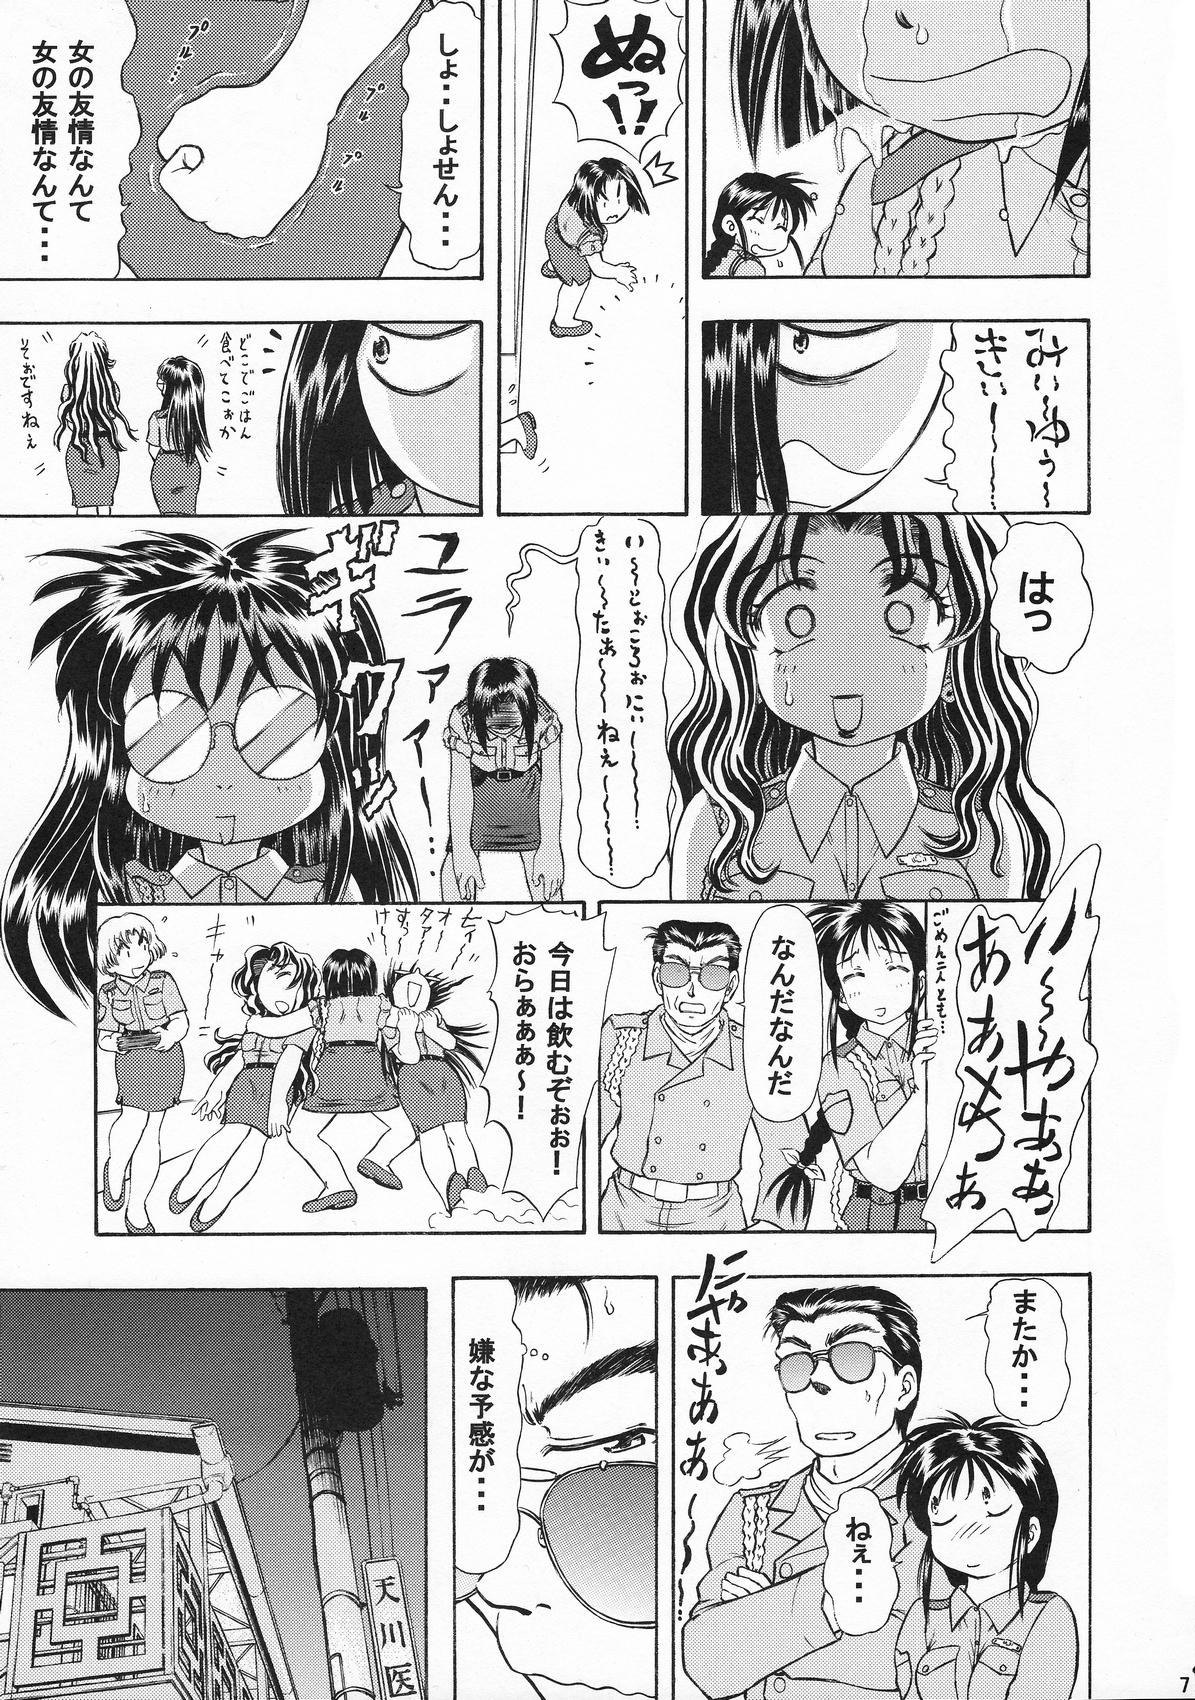 Funny Taiho+2 - Youre under arrest Thailand - Page 6